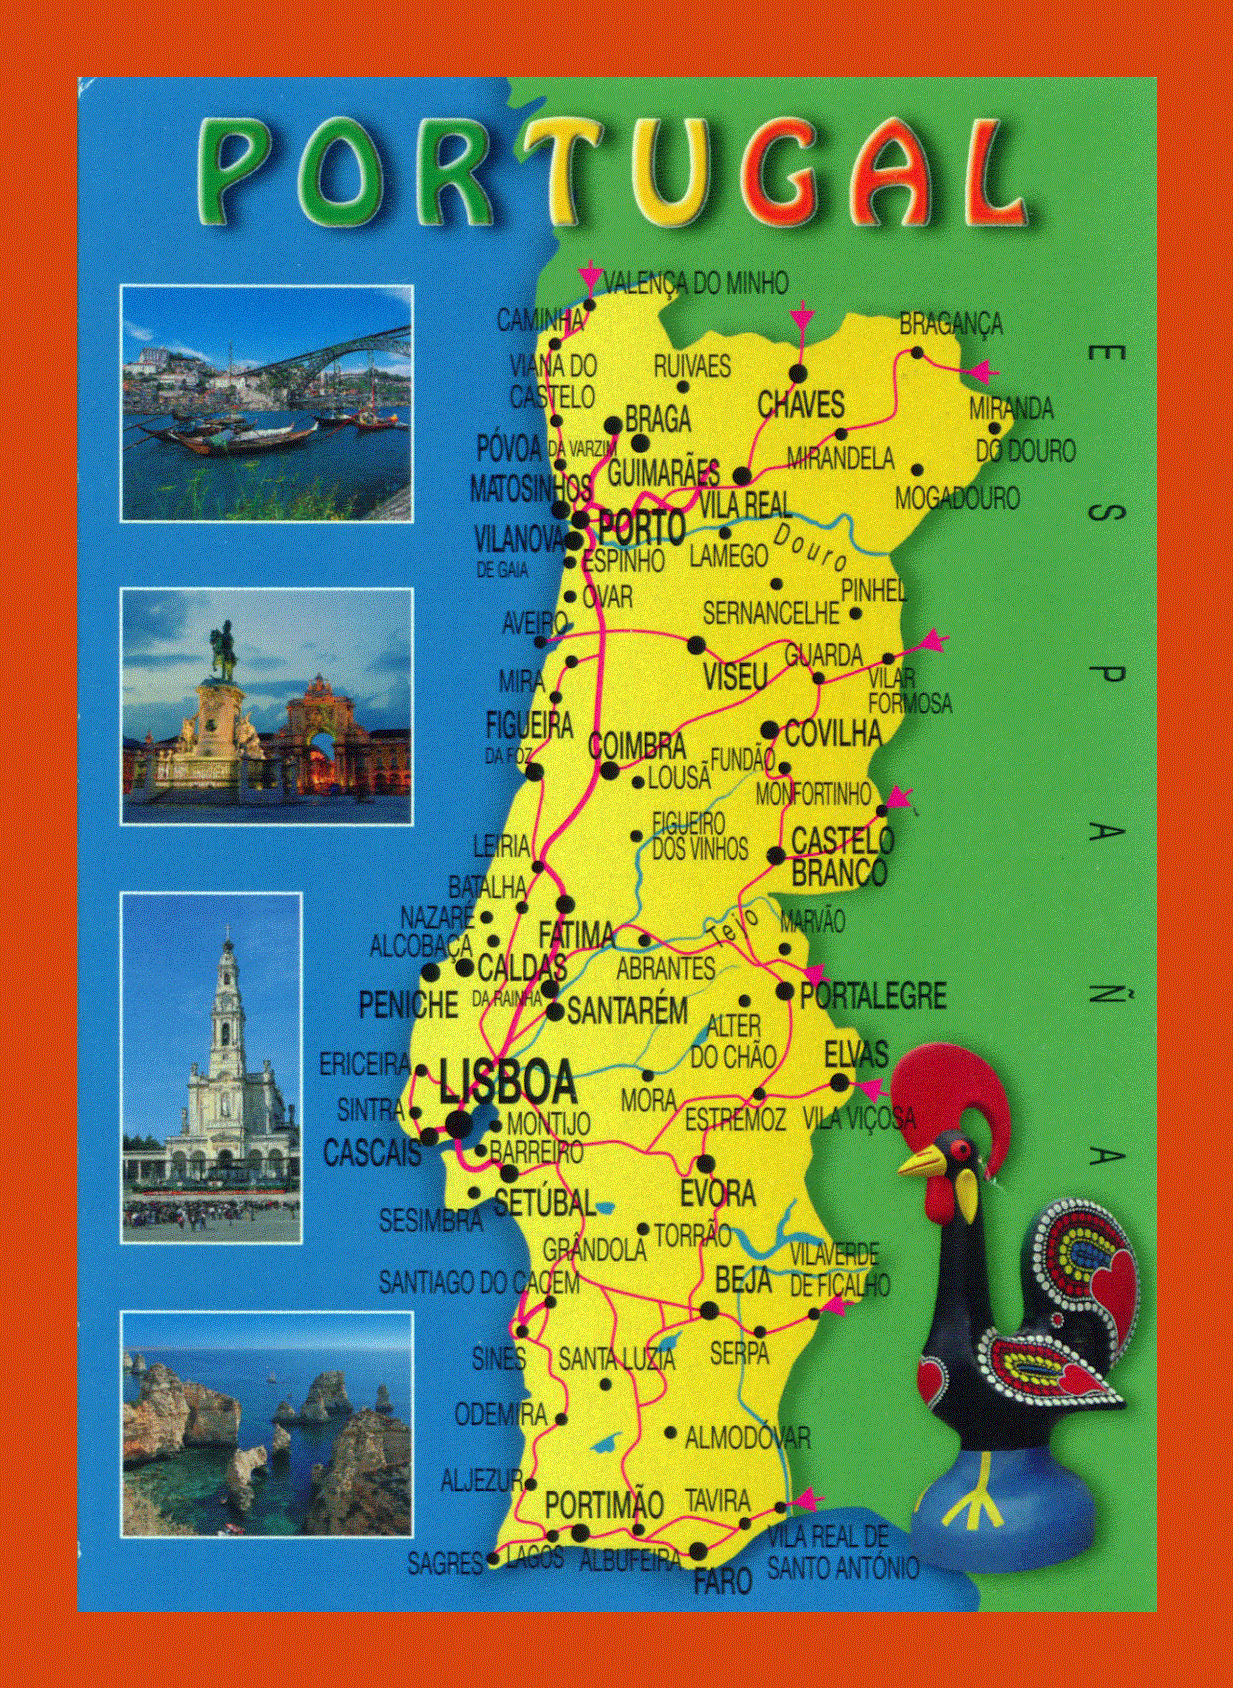 Tourist map of Portugal